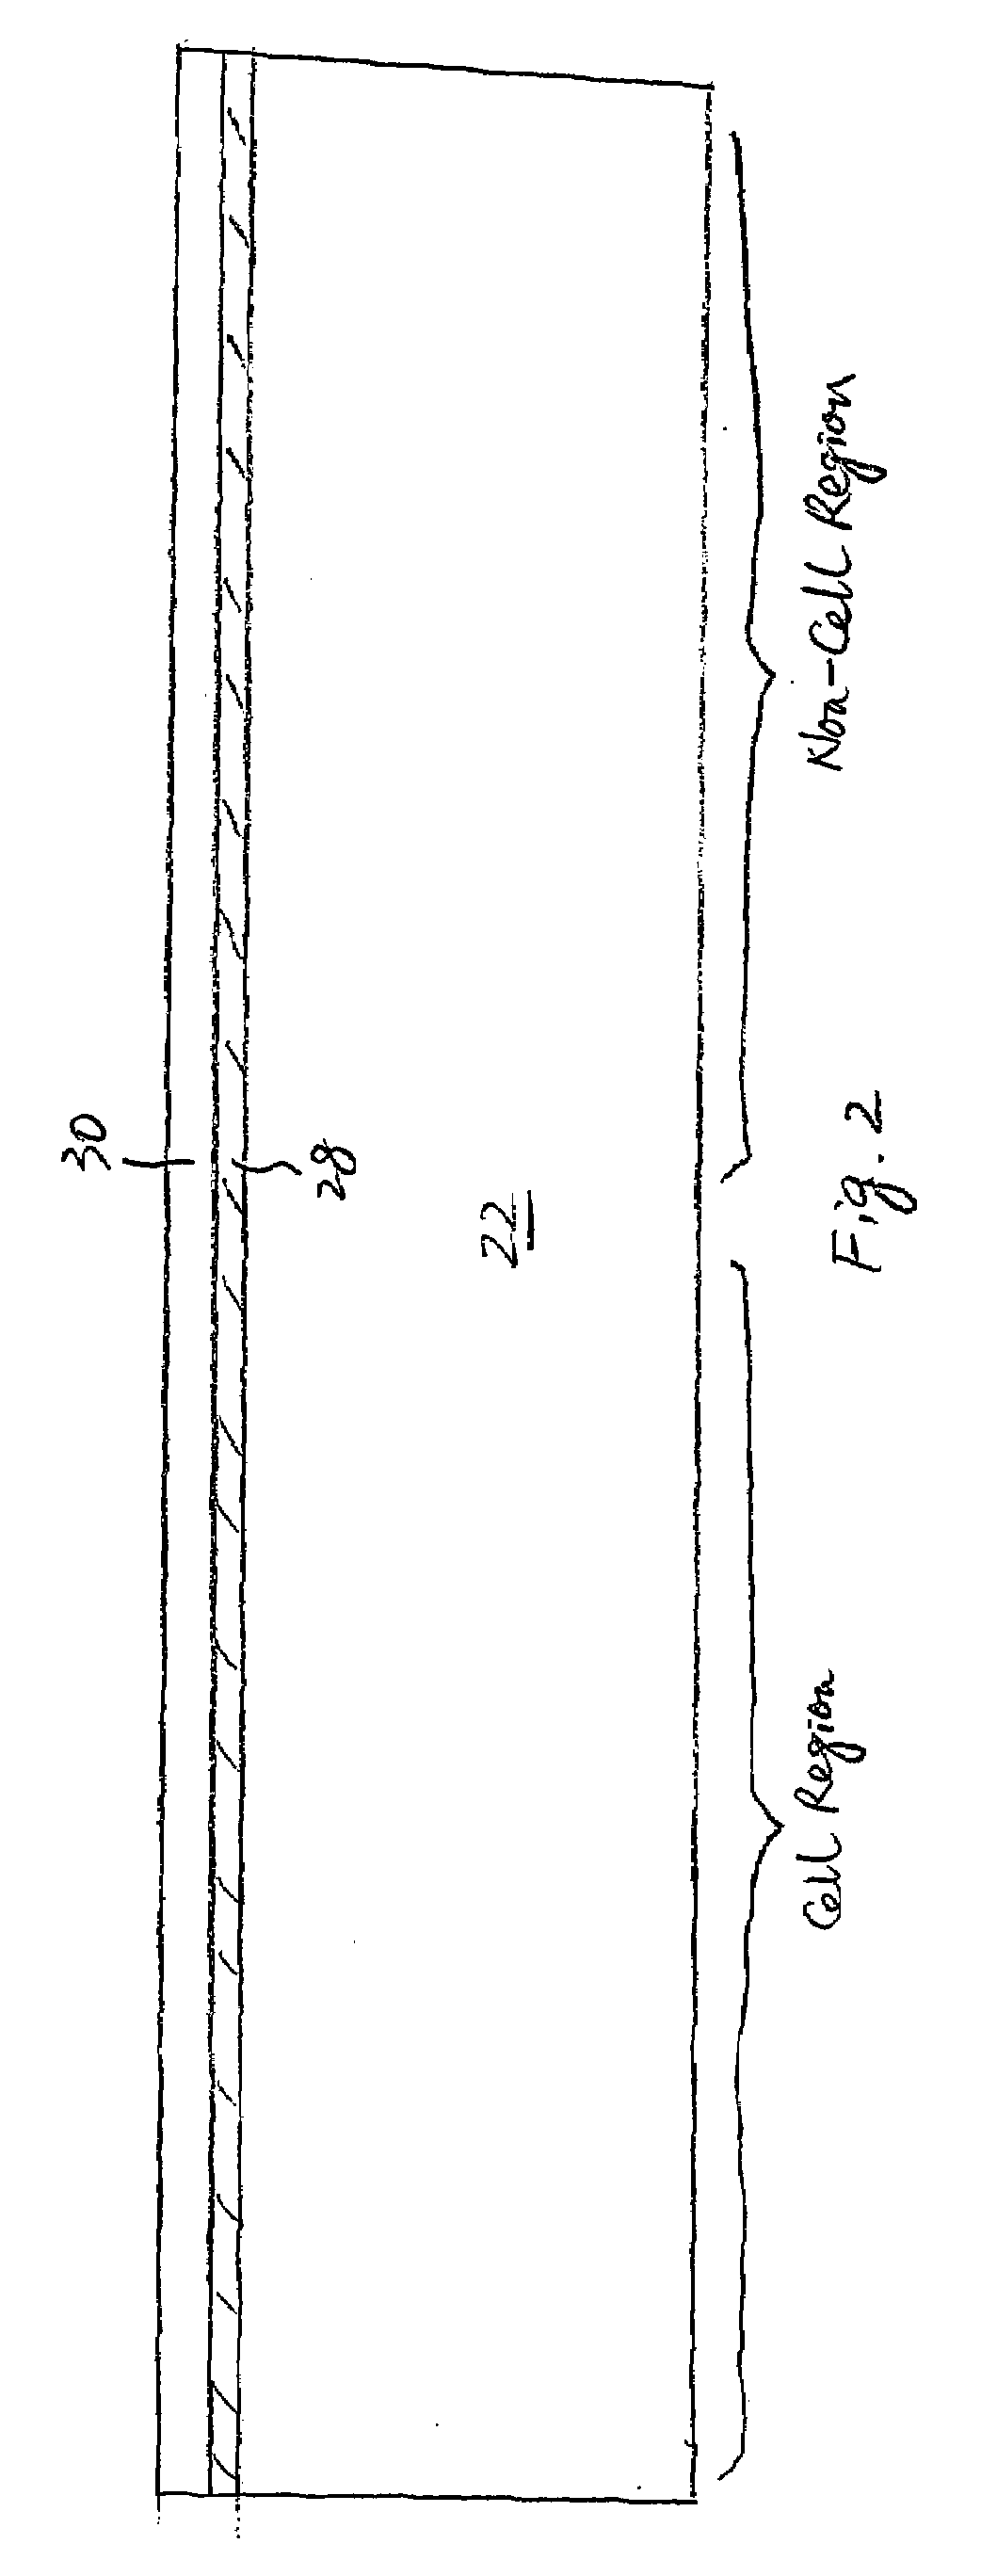 Method for reducing topography of non-volatile memory and resulting memory cells